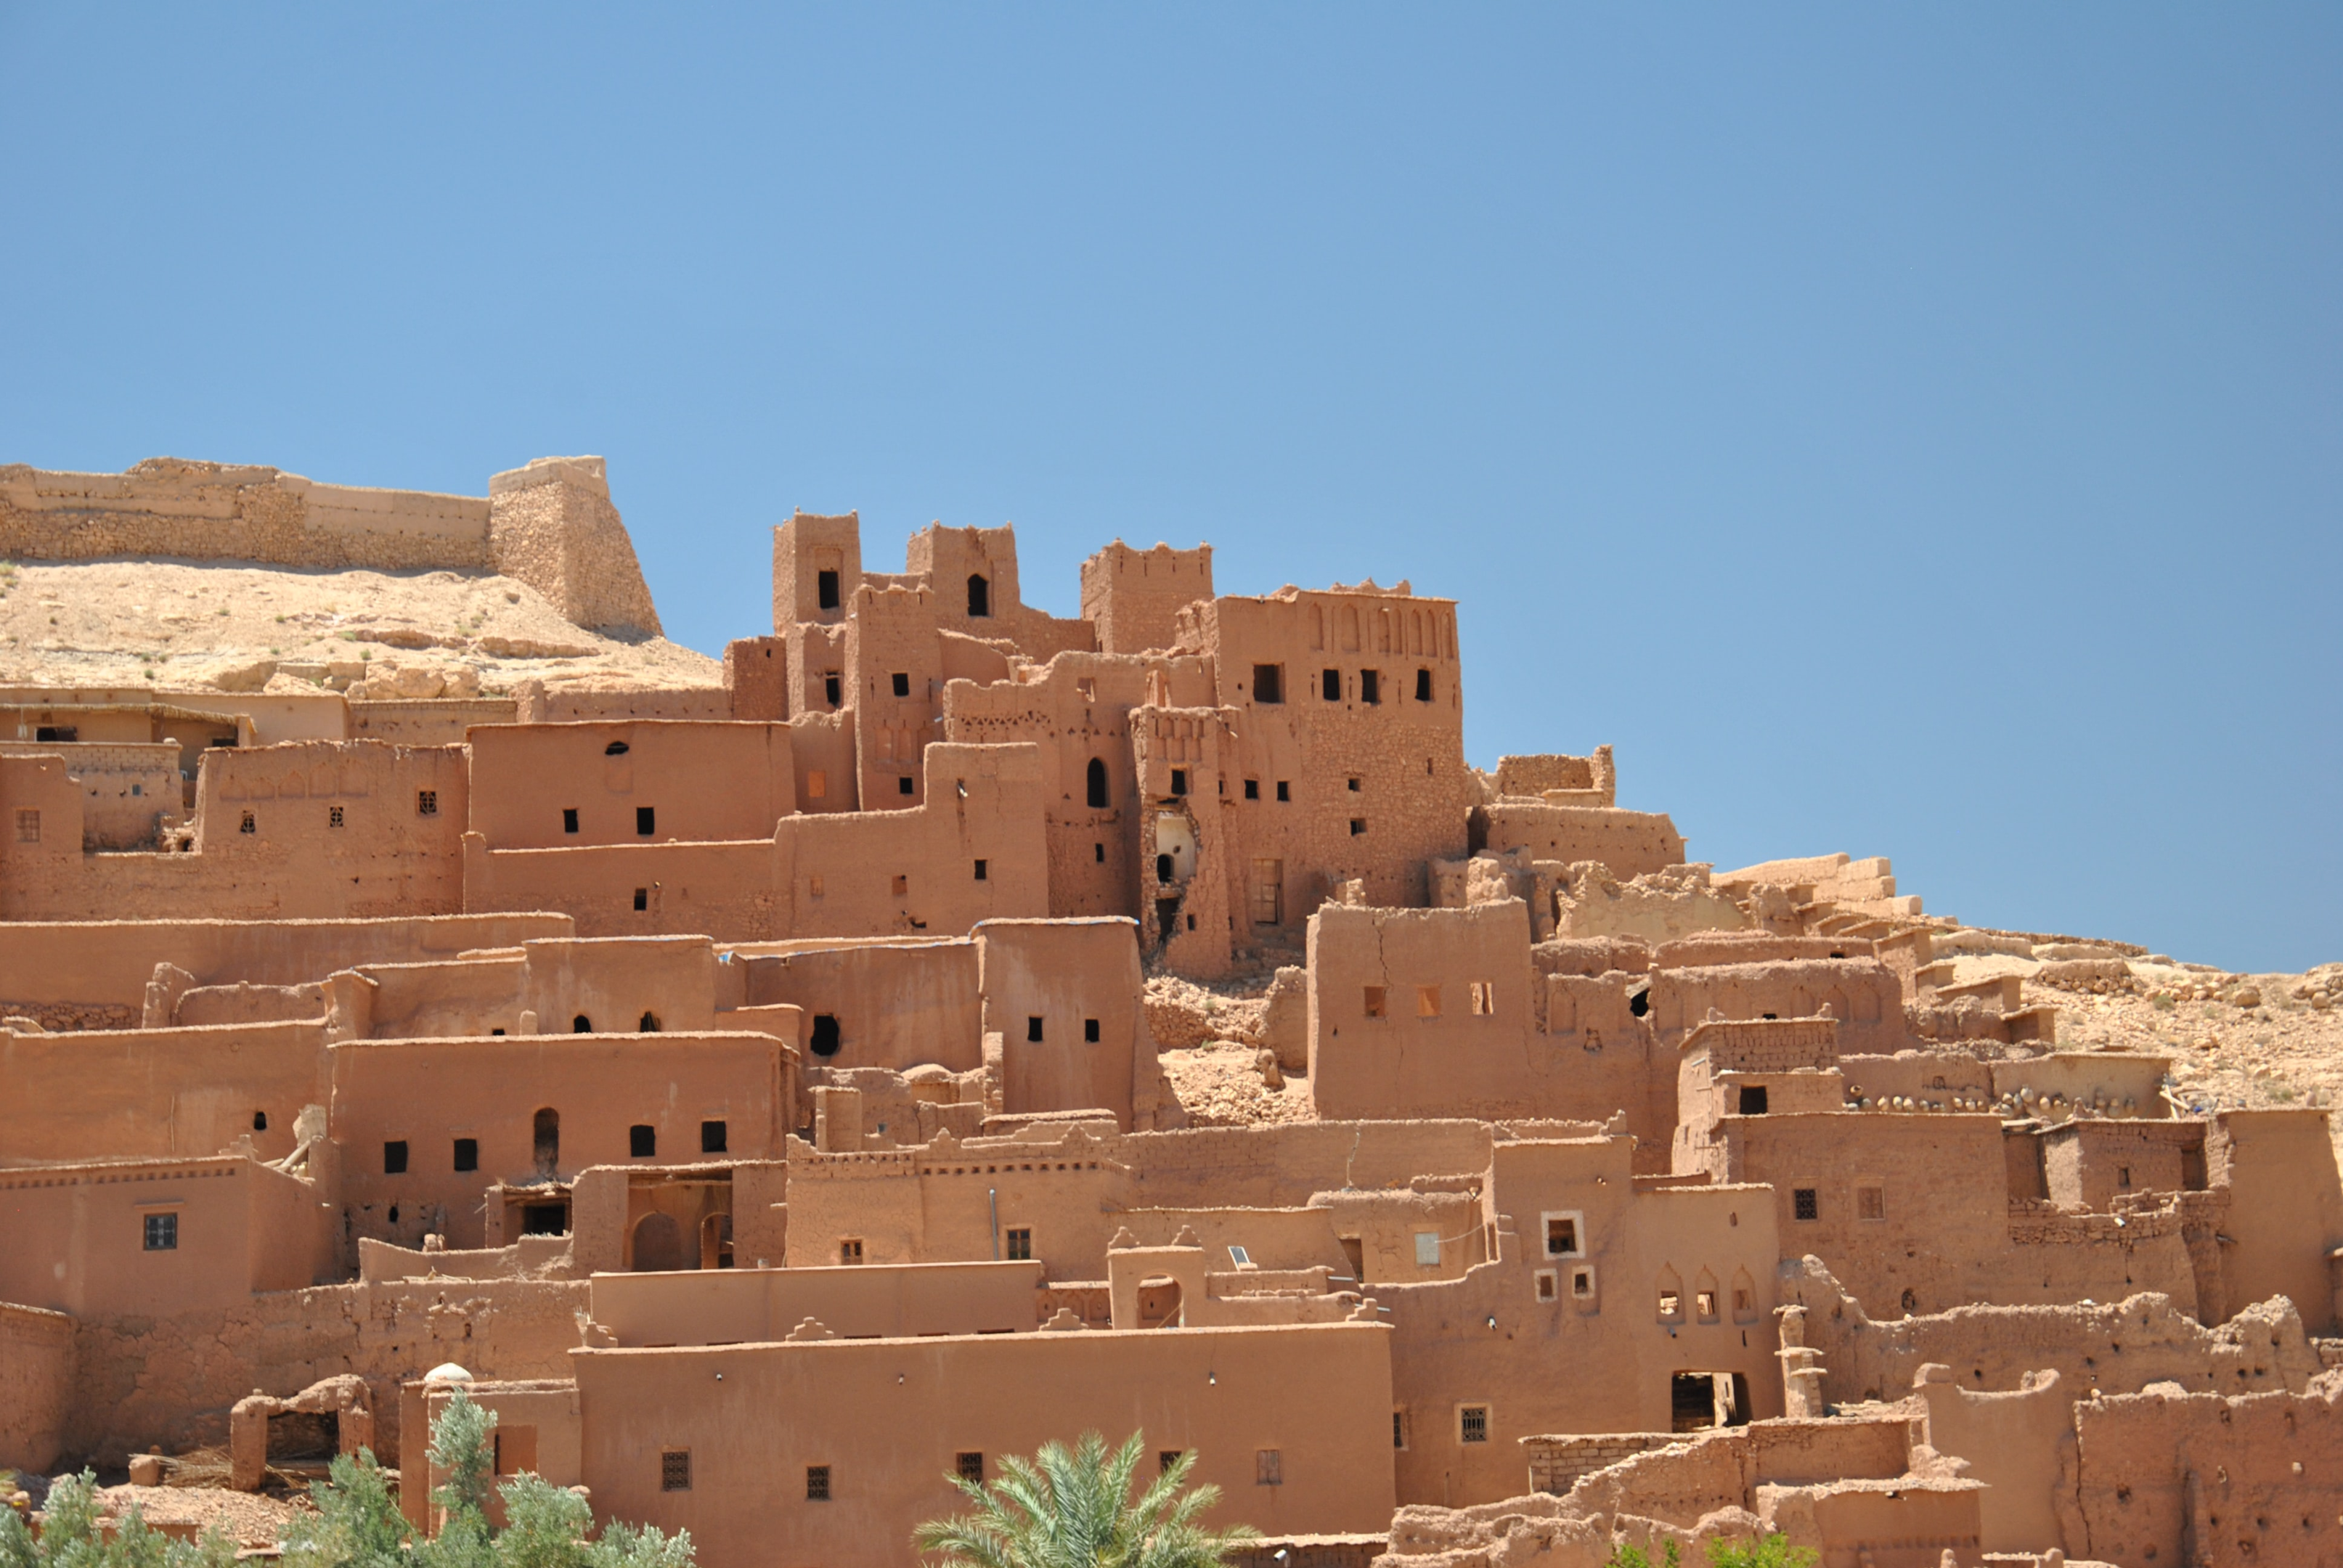 Game of Thrones Filming Location: Ait Benhaddou Morocco